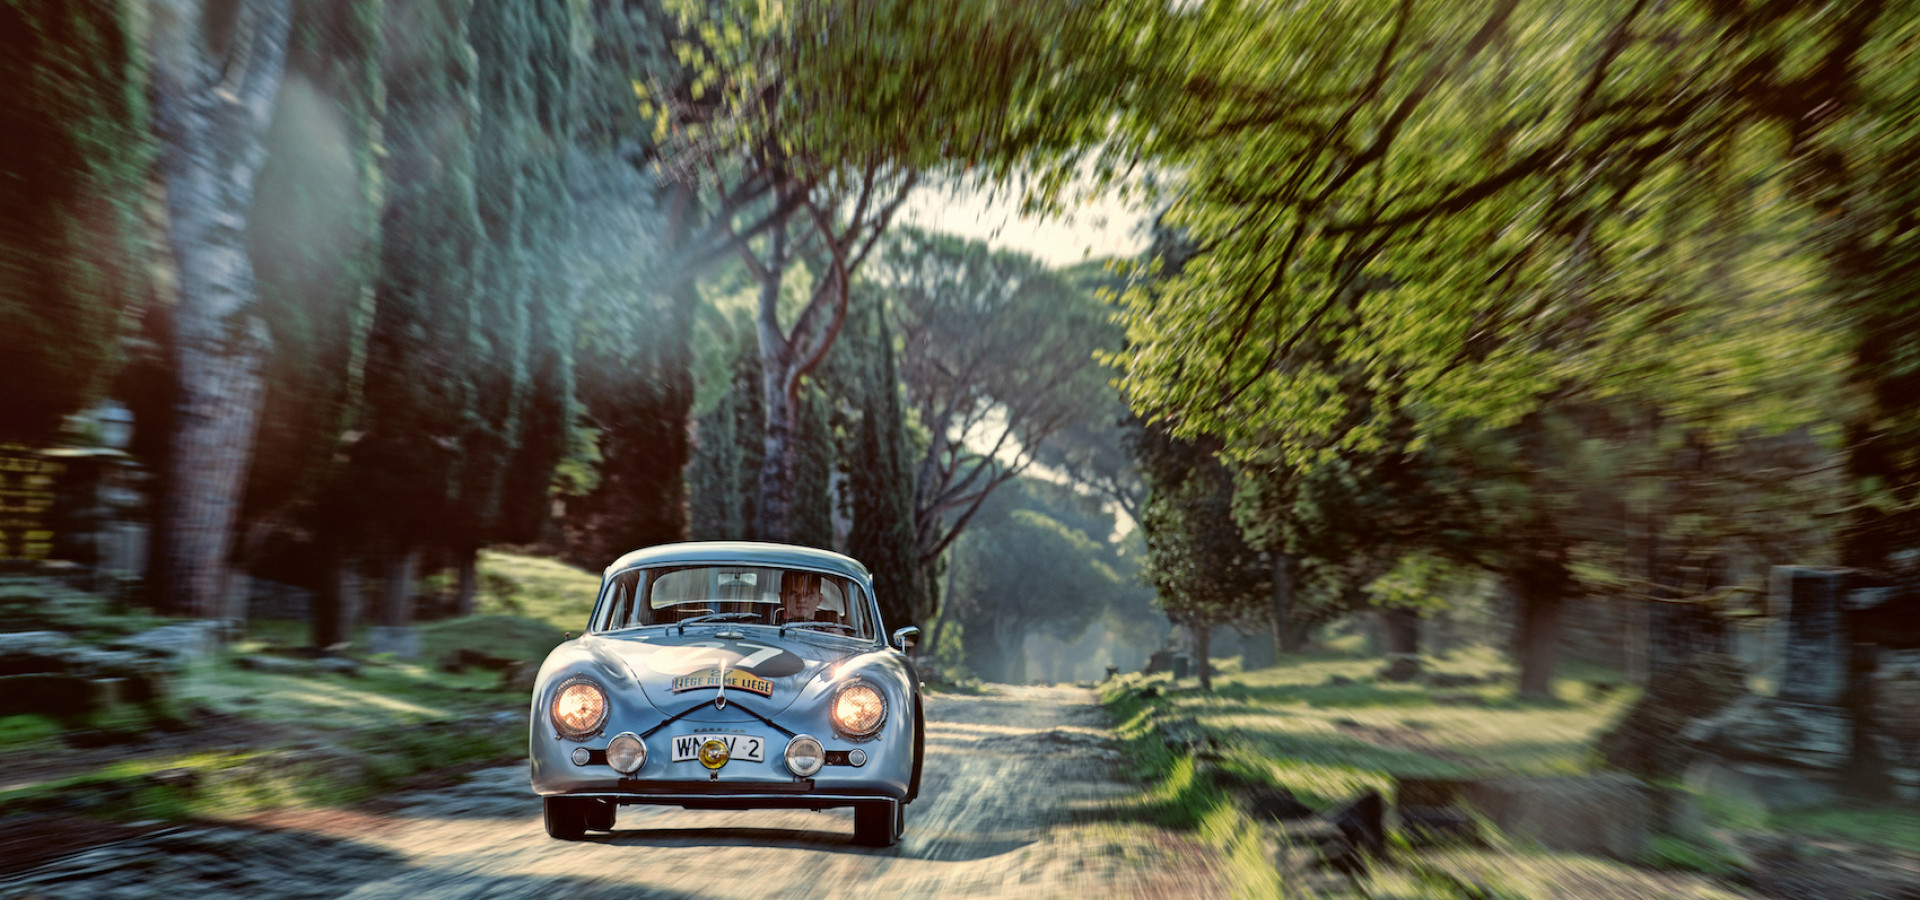 The Porsche 356 on the road to Rome